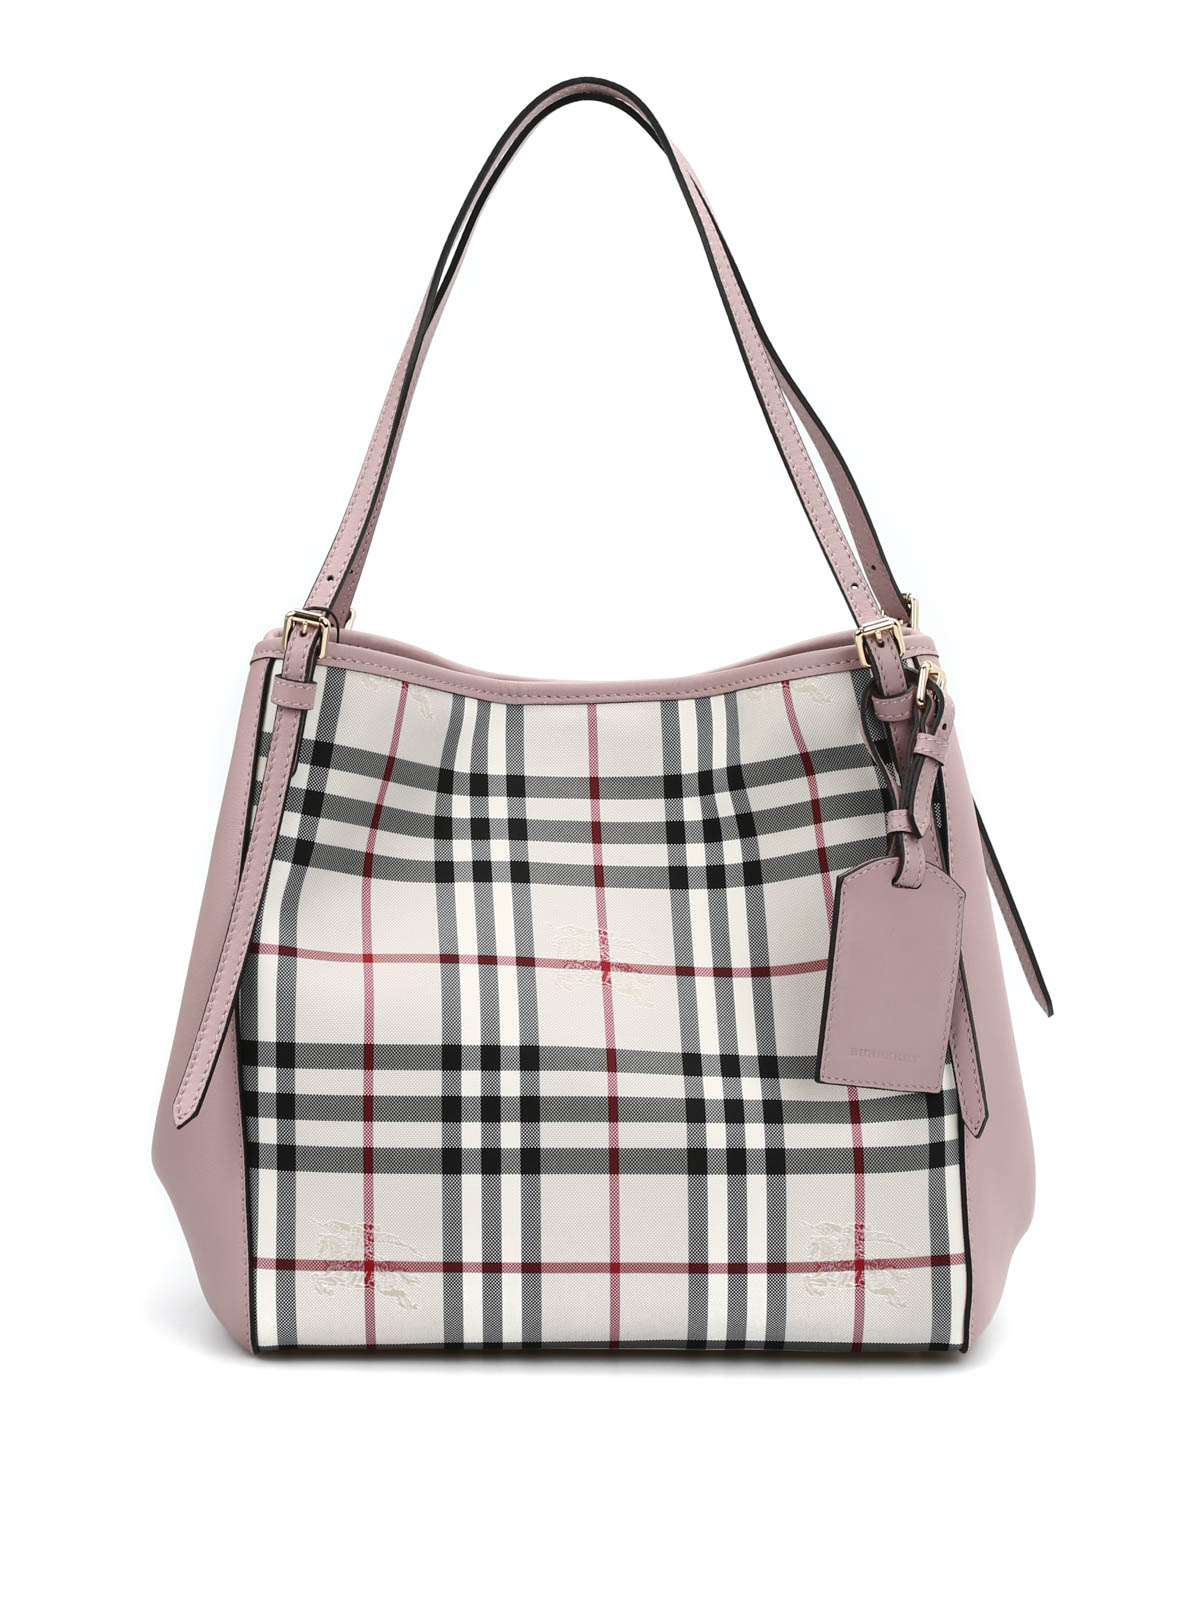 Totes bags Burberry - Small Canter tote - 4003438